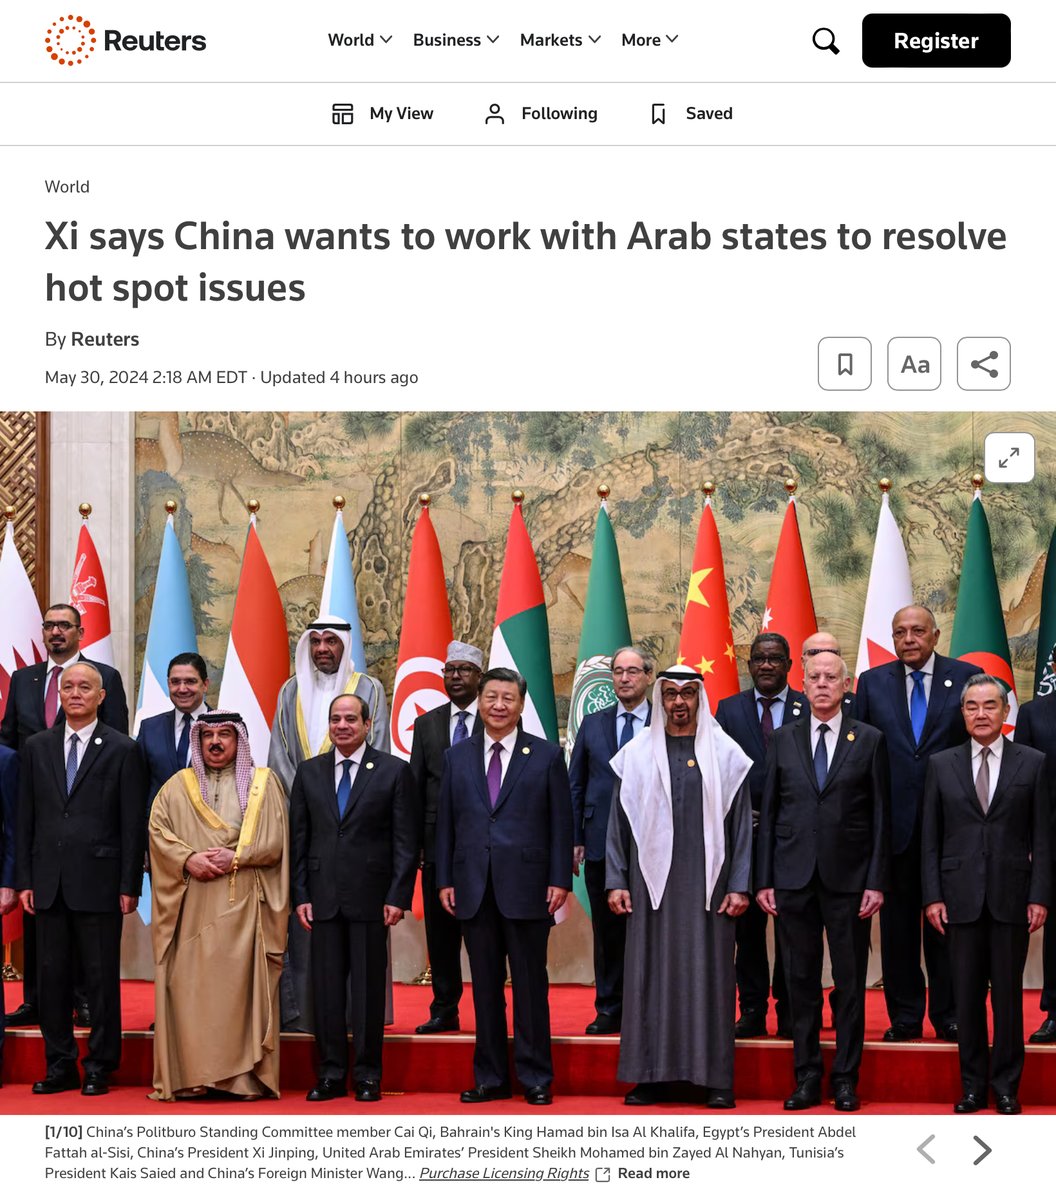 Another Biden foreign policy failure, siding with Iran, which spits in the US’s face, as China gets close with rival Arabs. Robert Gates remarked that Biden has been wrong on every major foreign policy issue throughout his entire political career… @SecBlinken @VP